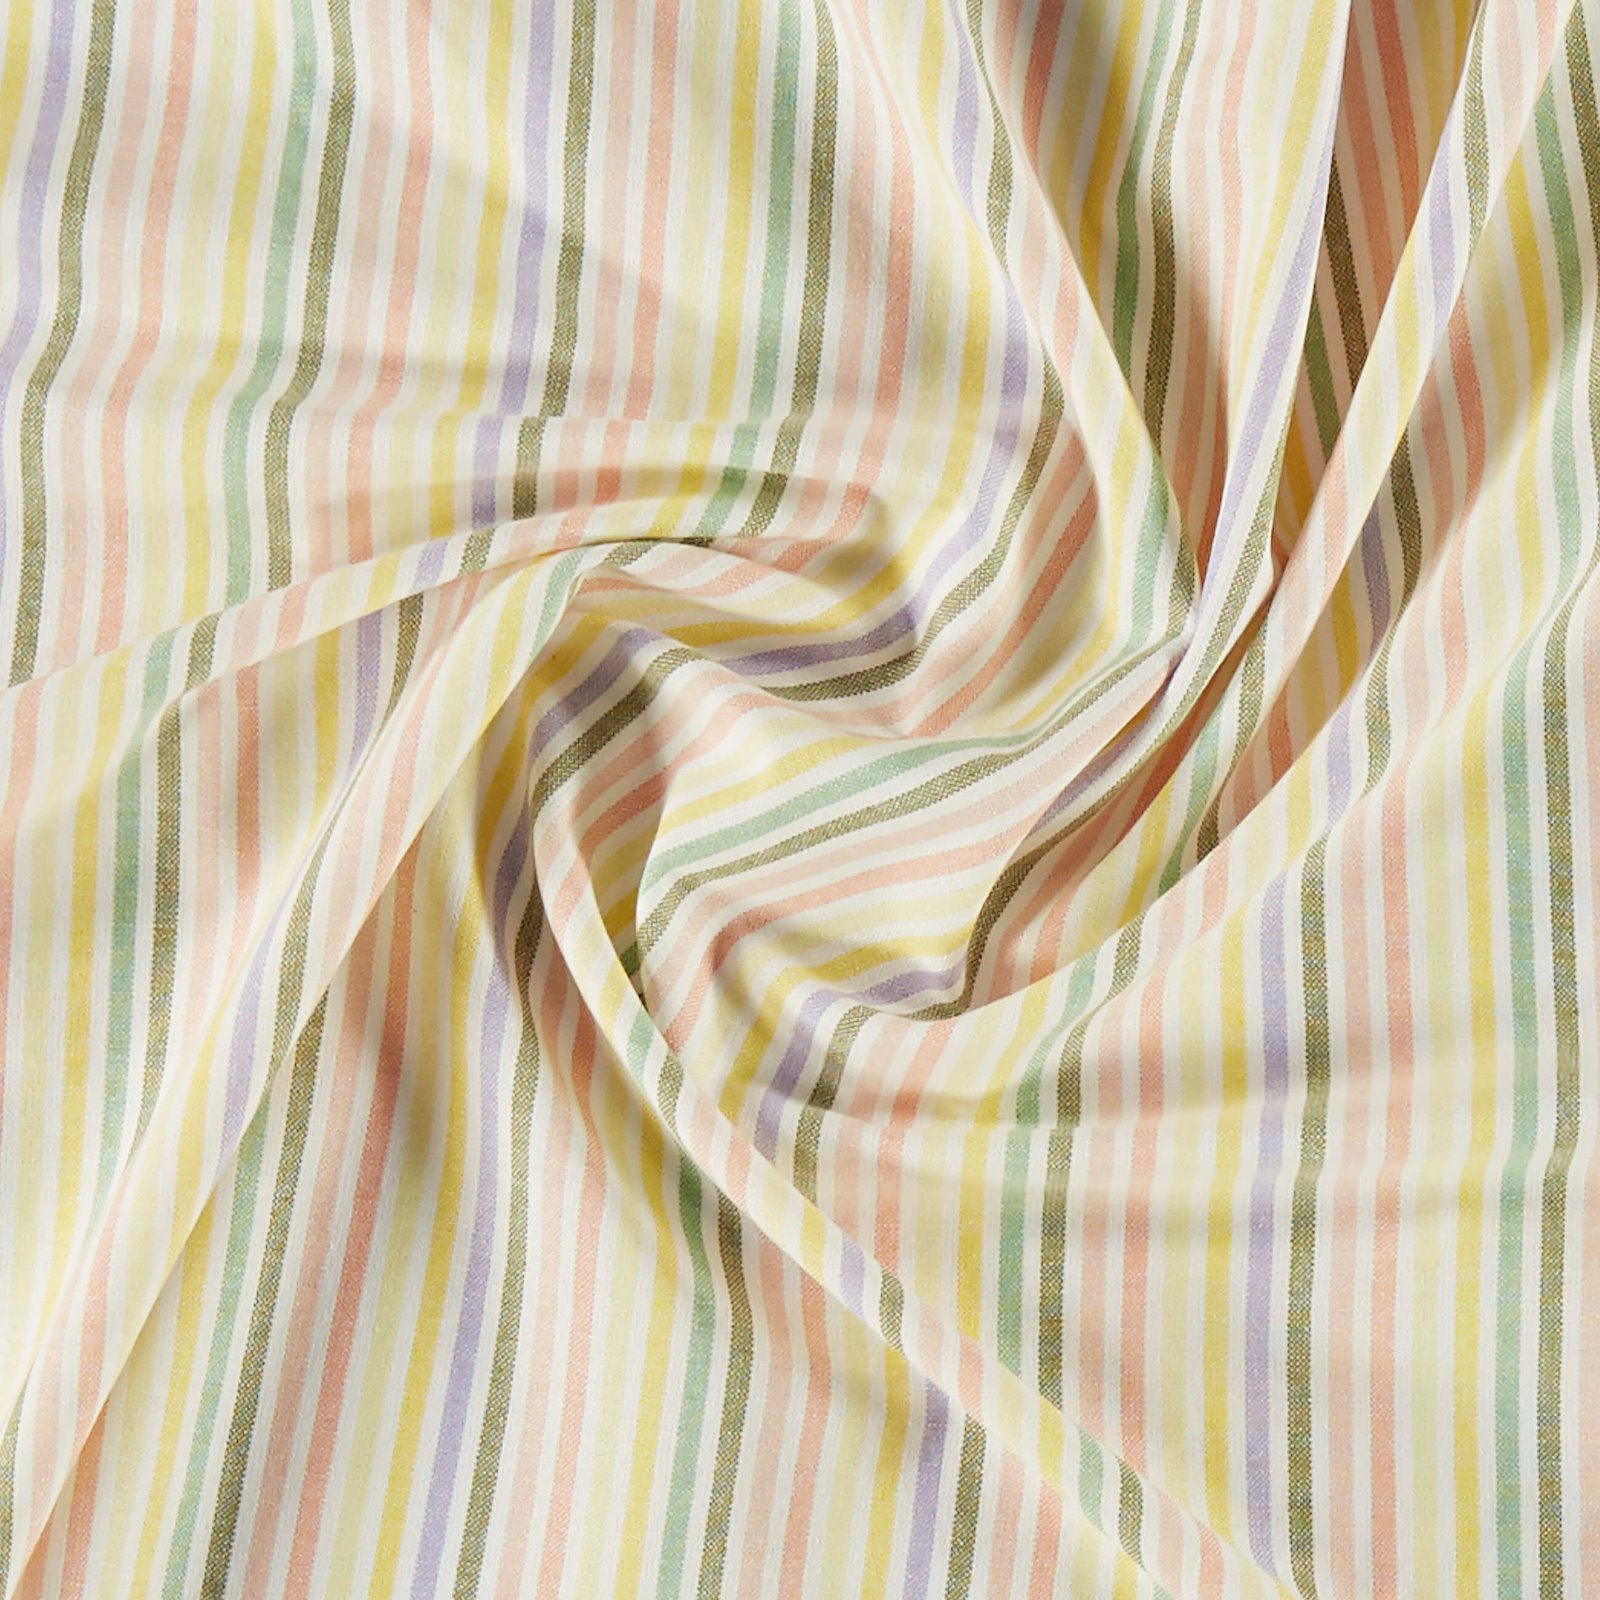 Woven cotton w multicolored YD stripes 816304_pack